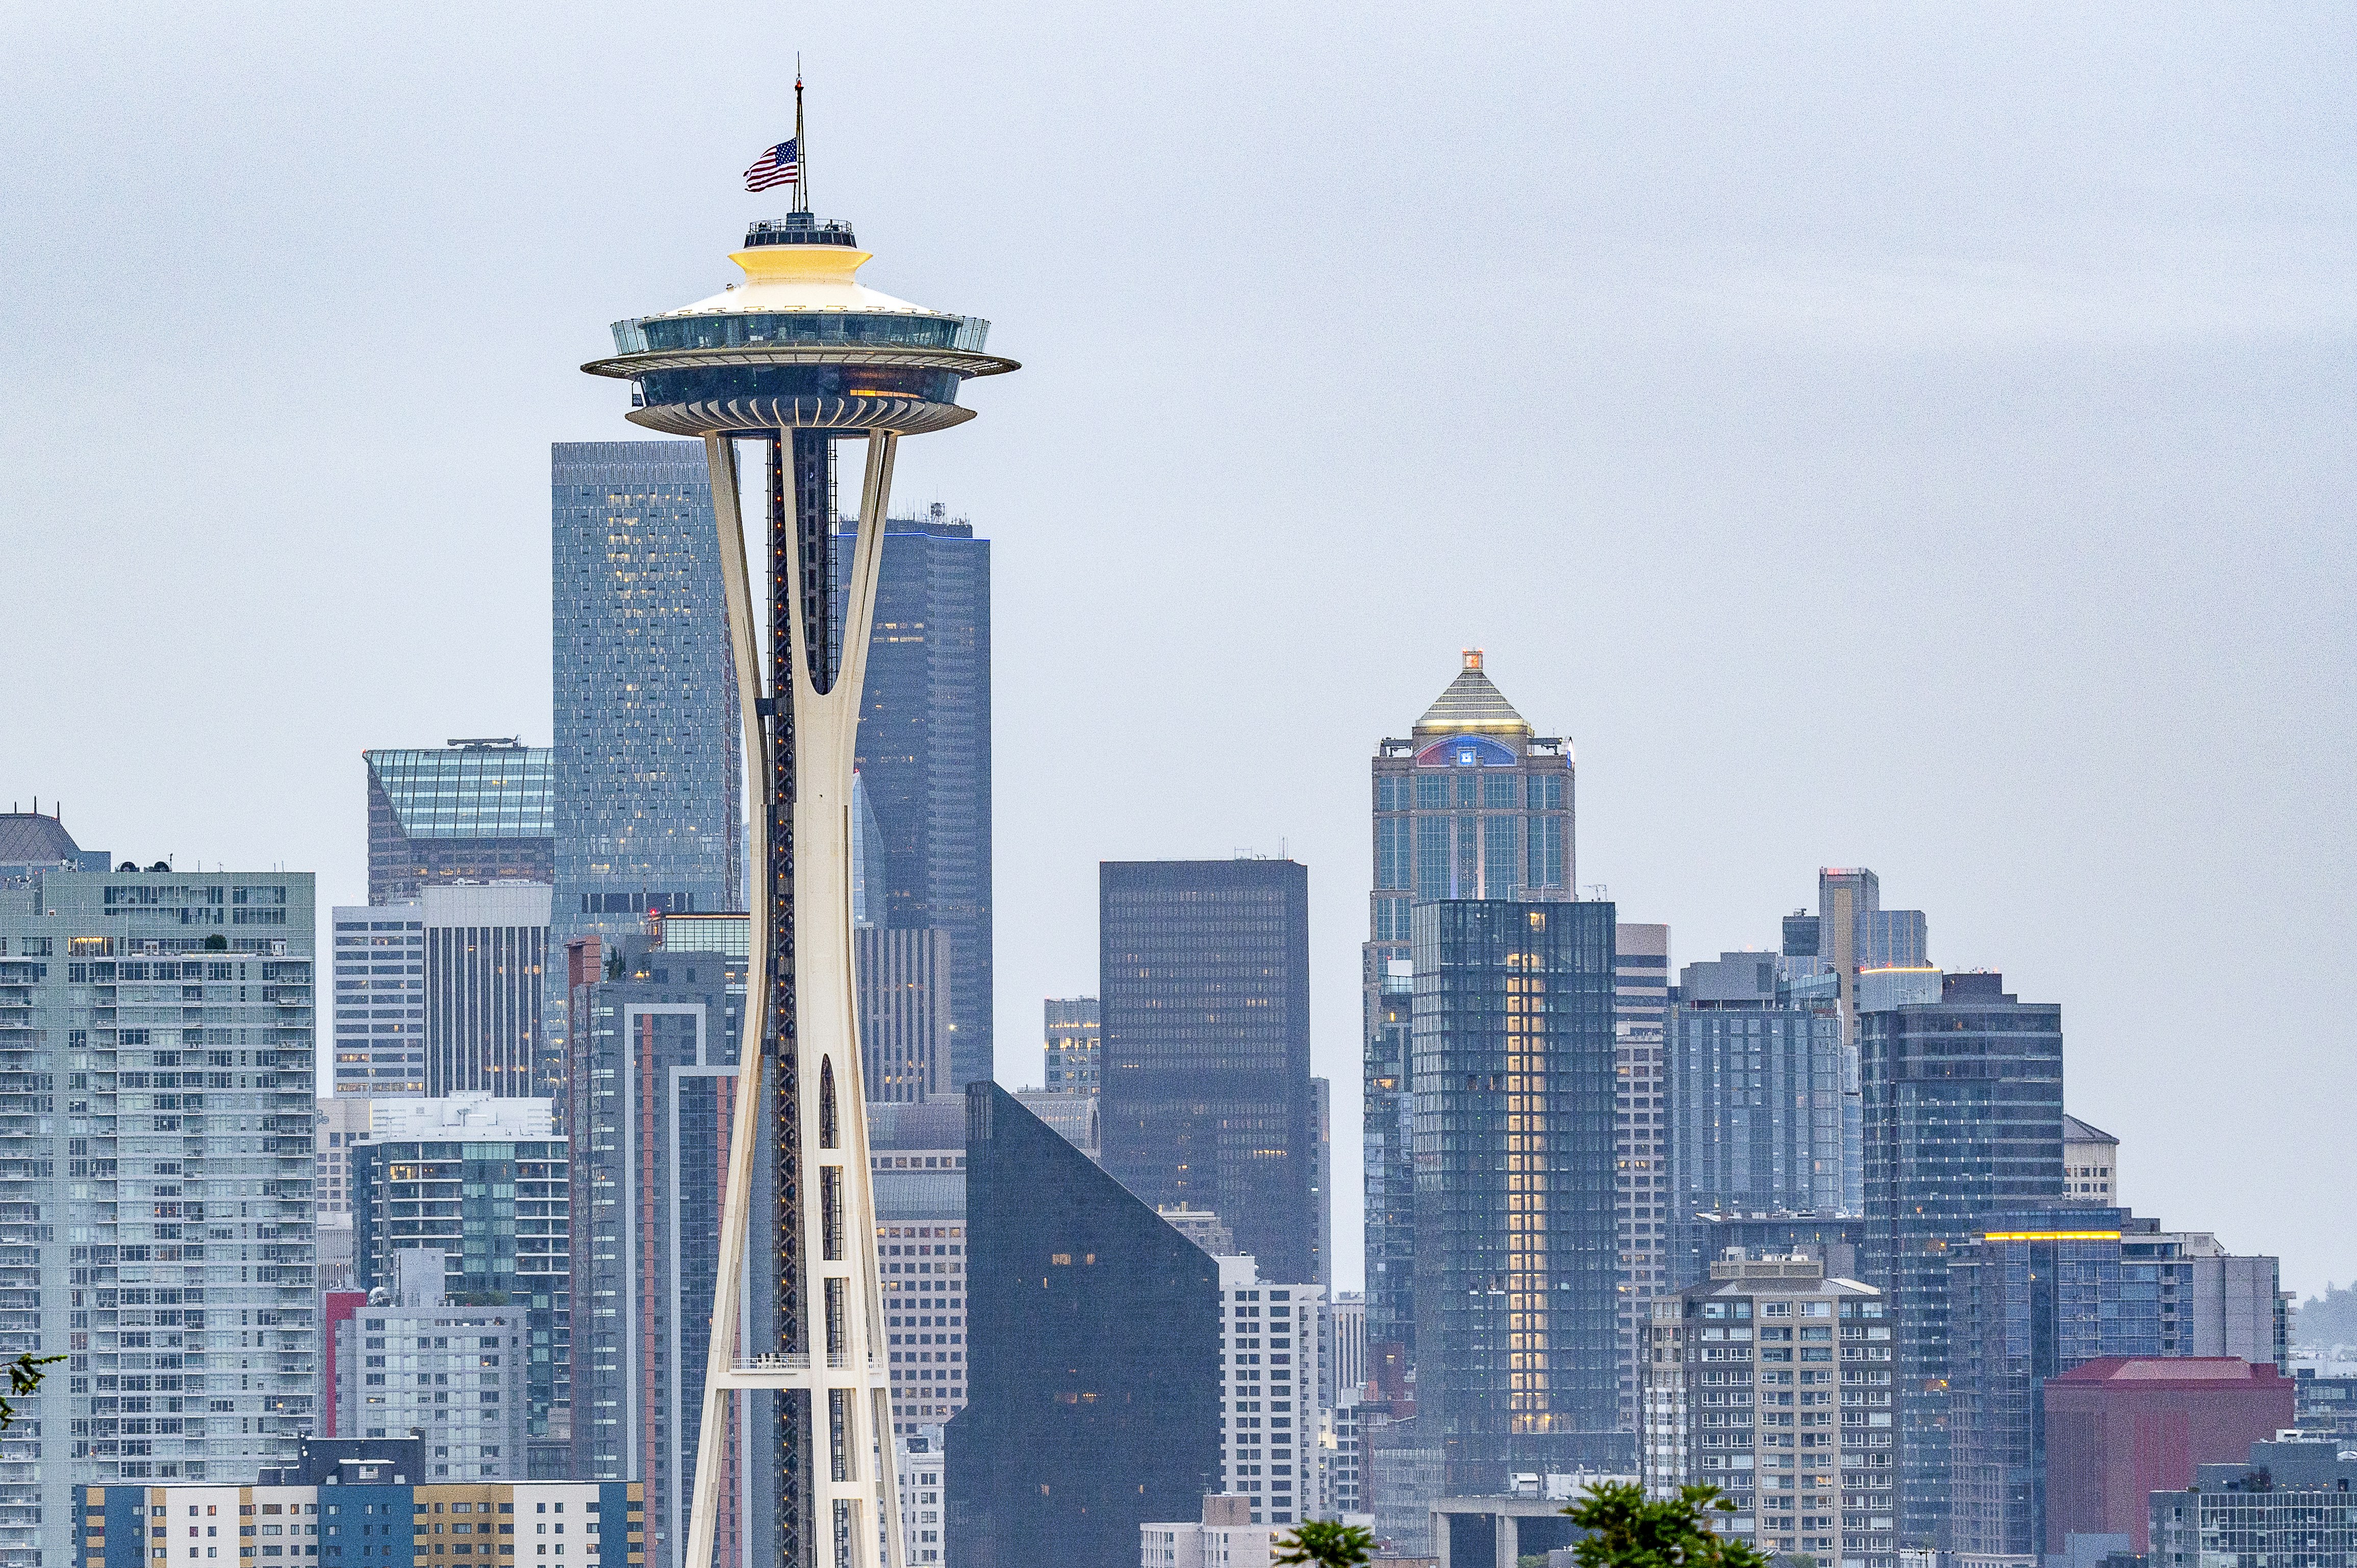 Picture of the Space Needle with the US Flag flying at half-staff, on Memorial Day 2020 with the city of Seattle visible. Taken shortly after sunrise on May 25, 2020. Seattle prepares to honor fallen soldiers in a unique way, due to social distancing.